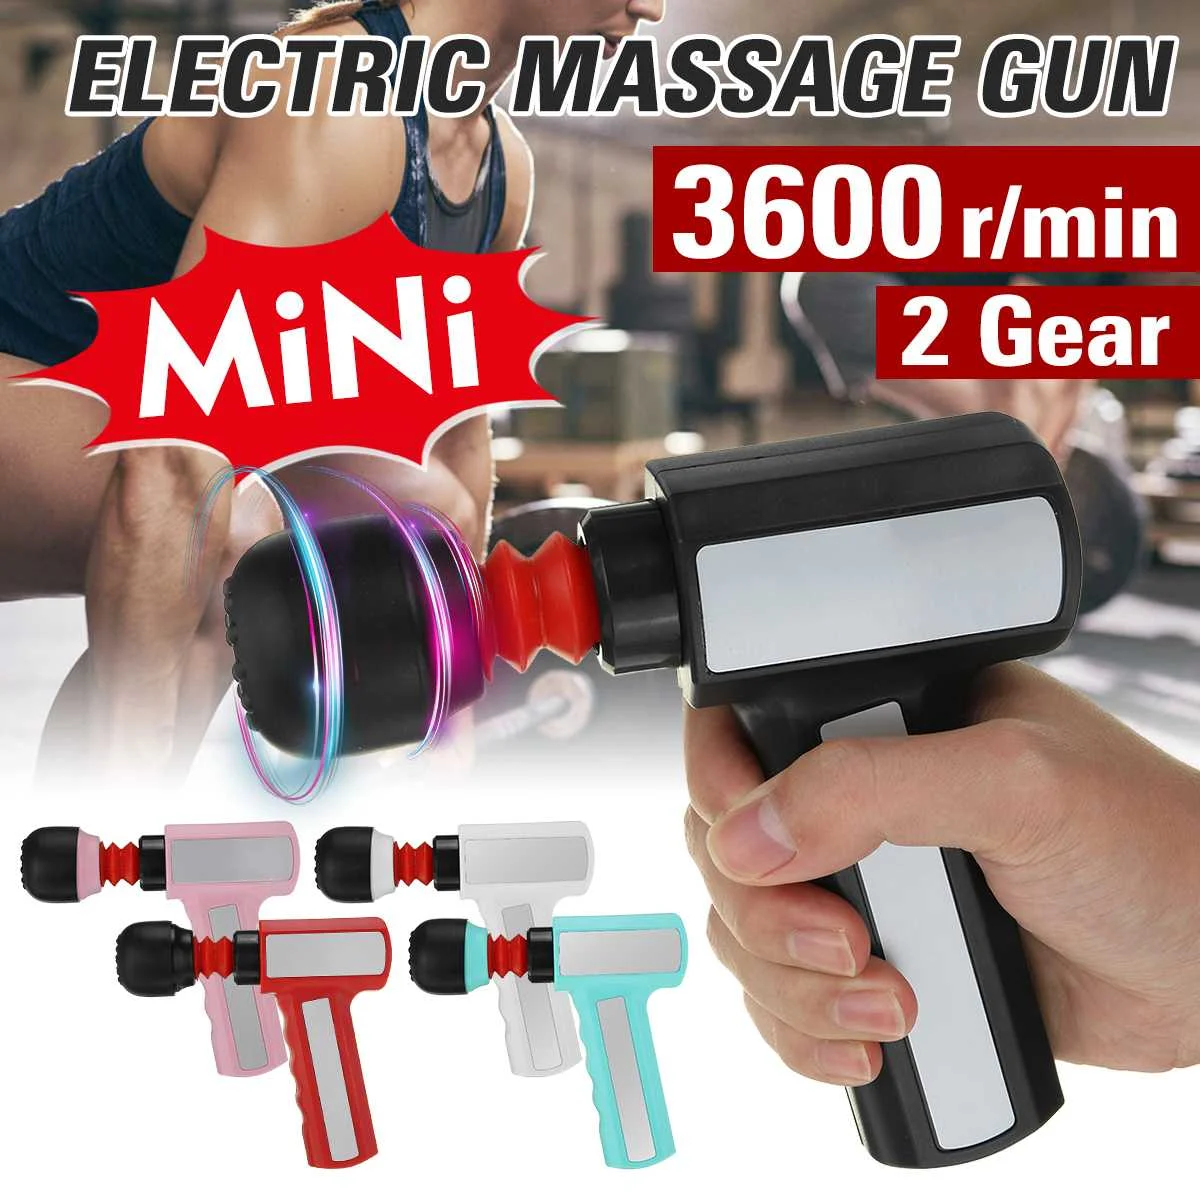 3600r/min Mini Electric Massage Gun Pocket Powerful Deep Muscle Fascia Body Massager Relaxation Slimming Shaping Pain Relief